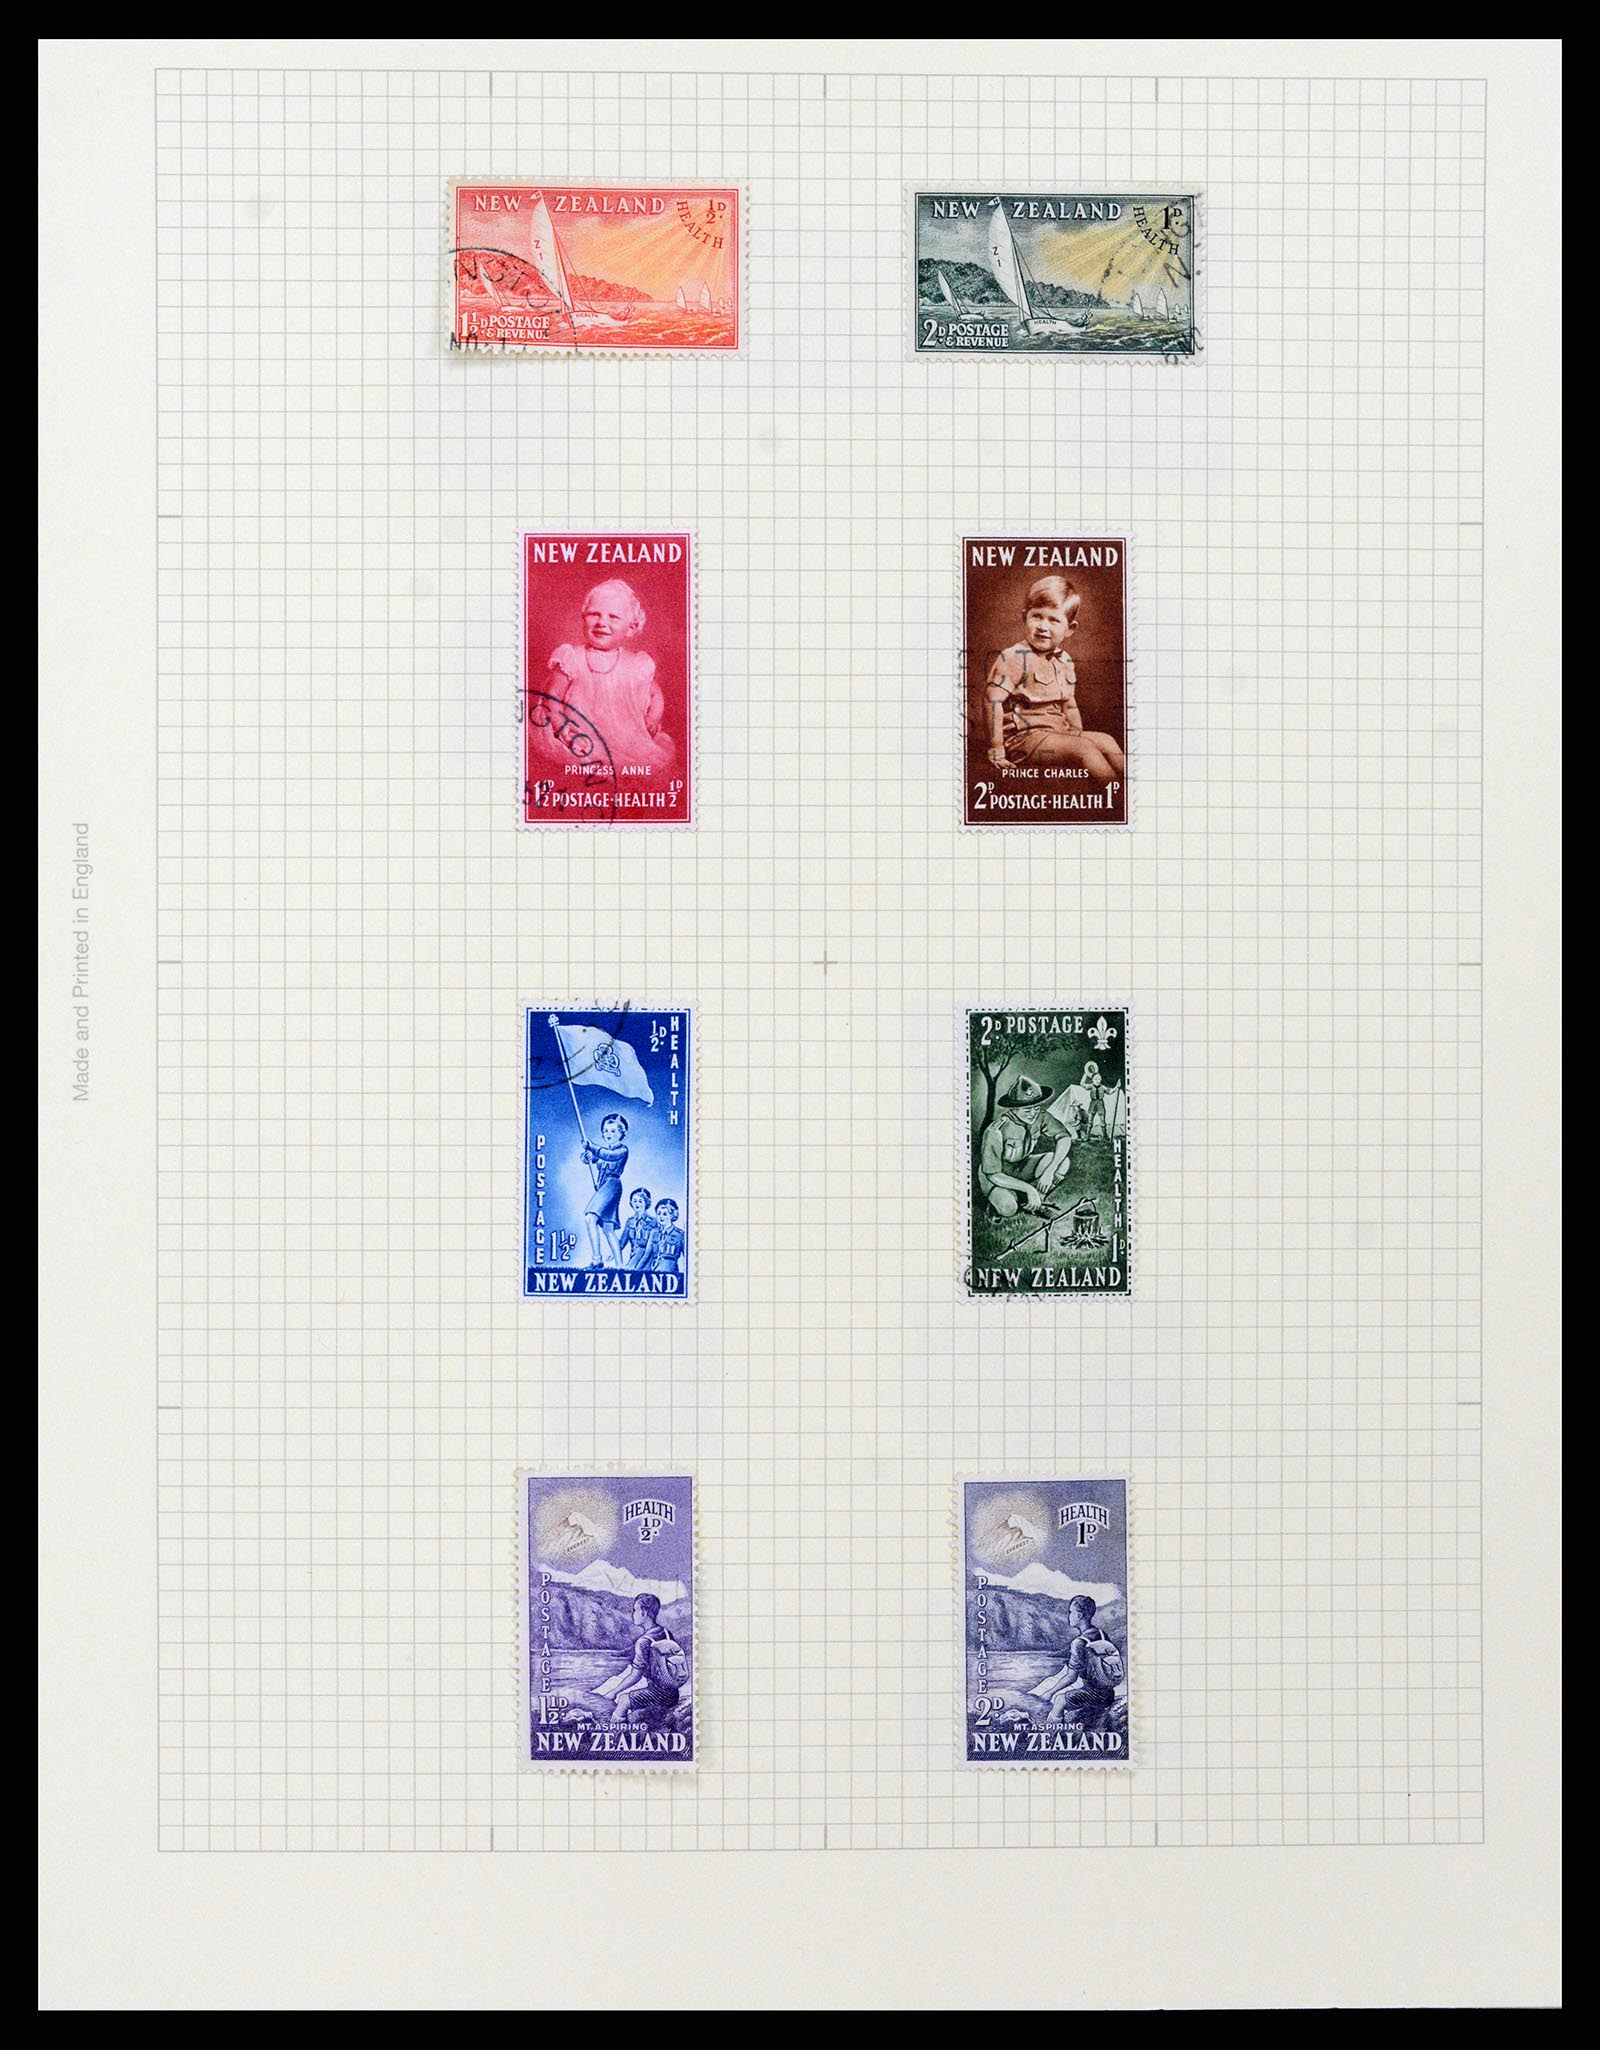 37608 077 - Stamp collection 37608 New Zealand 1874-2014.